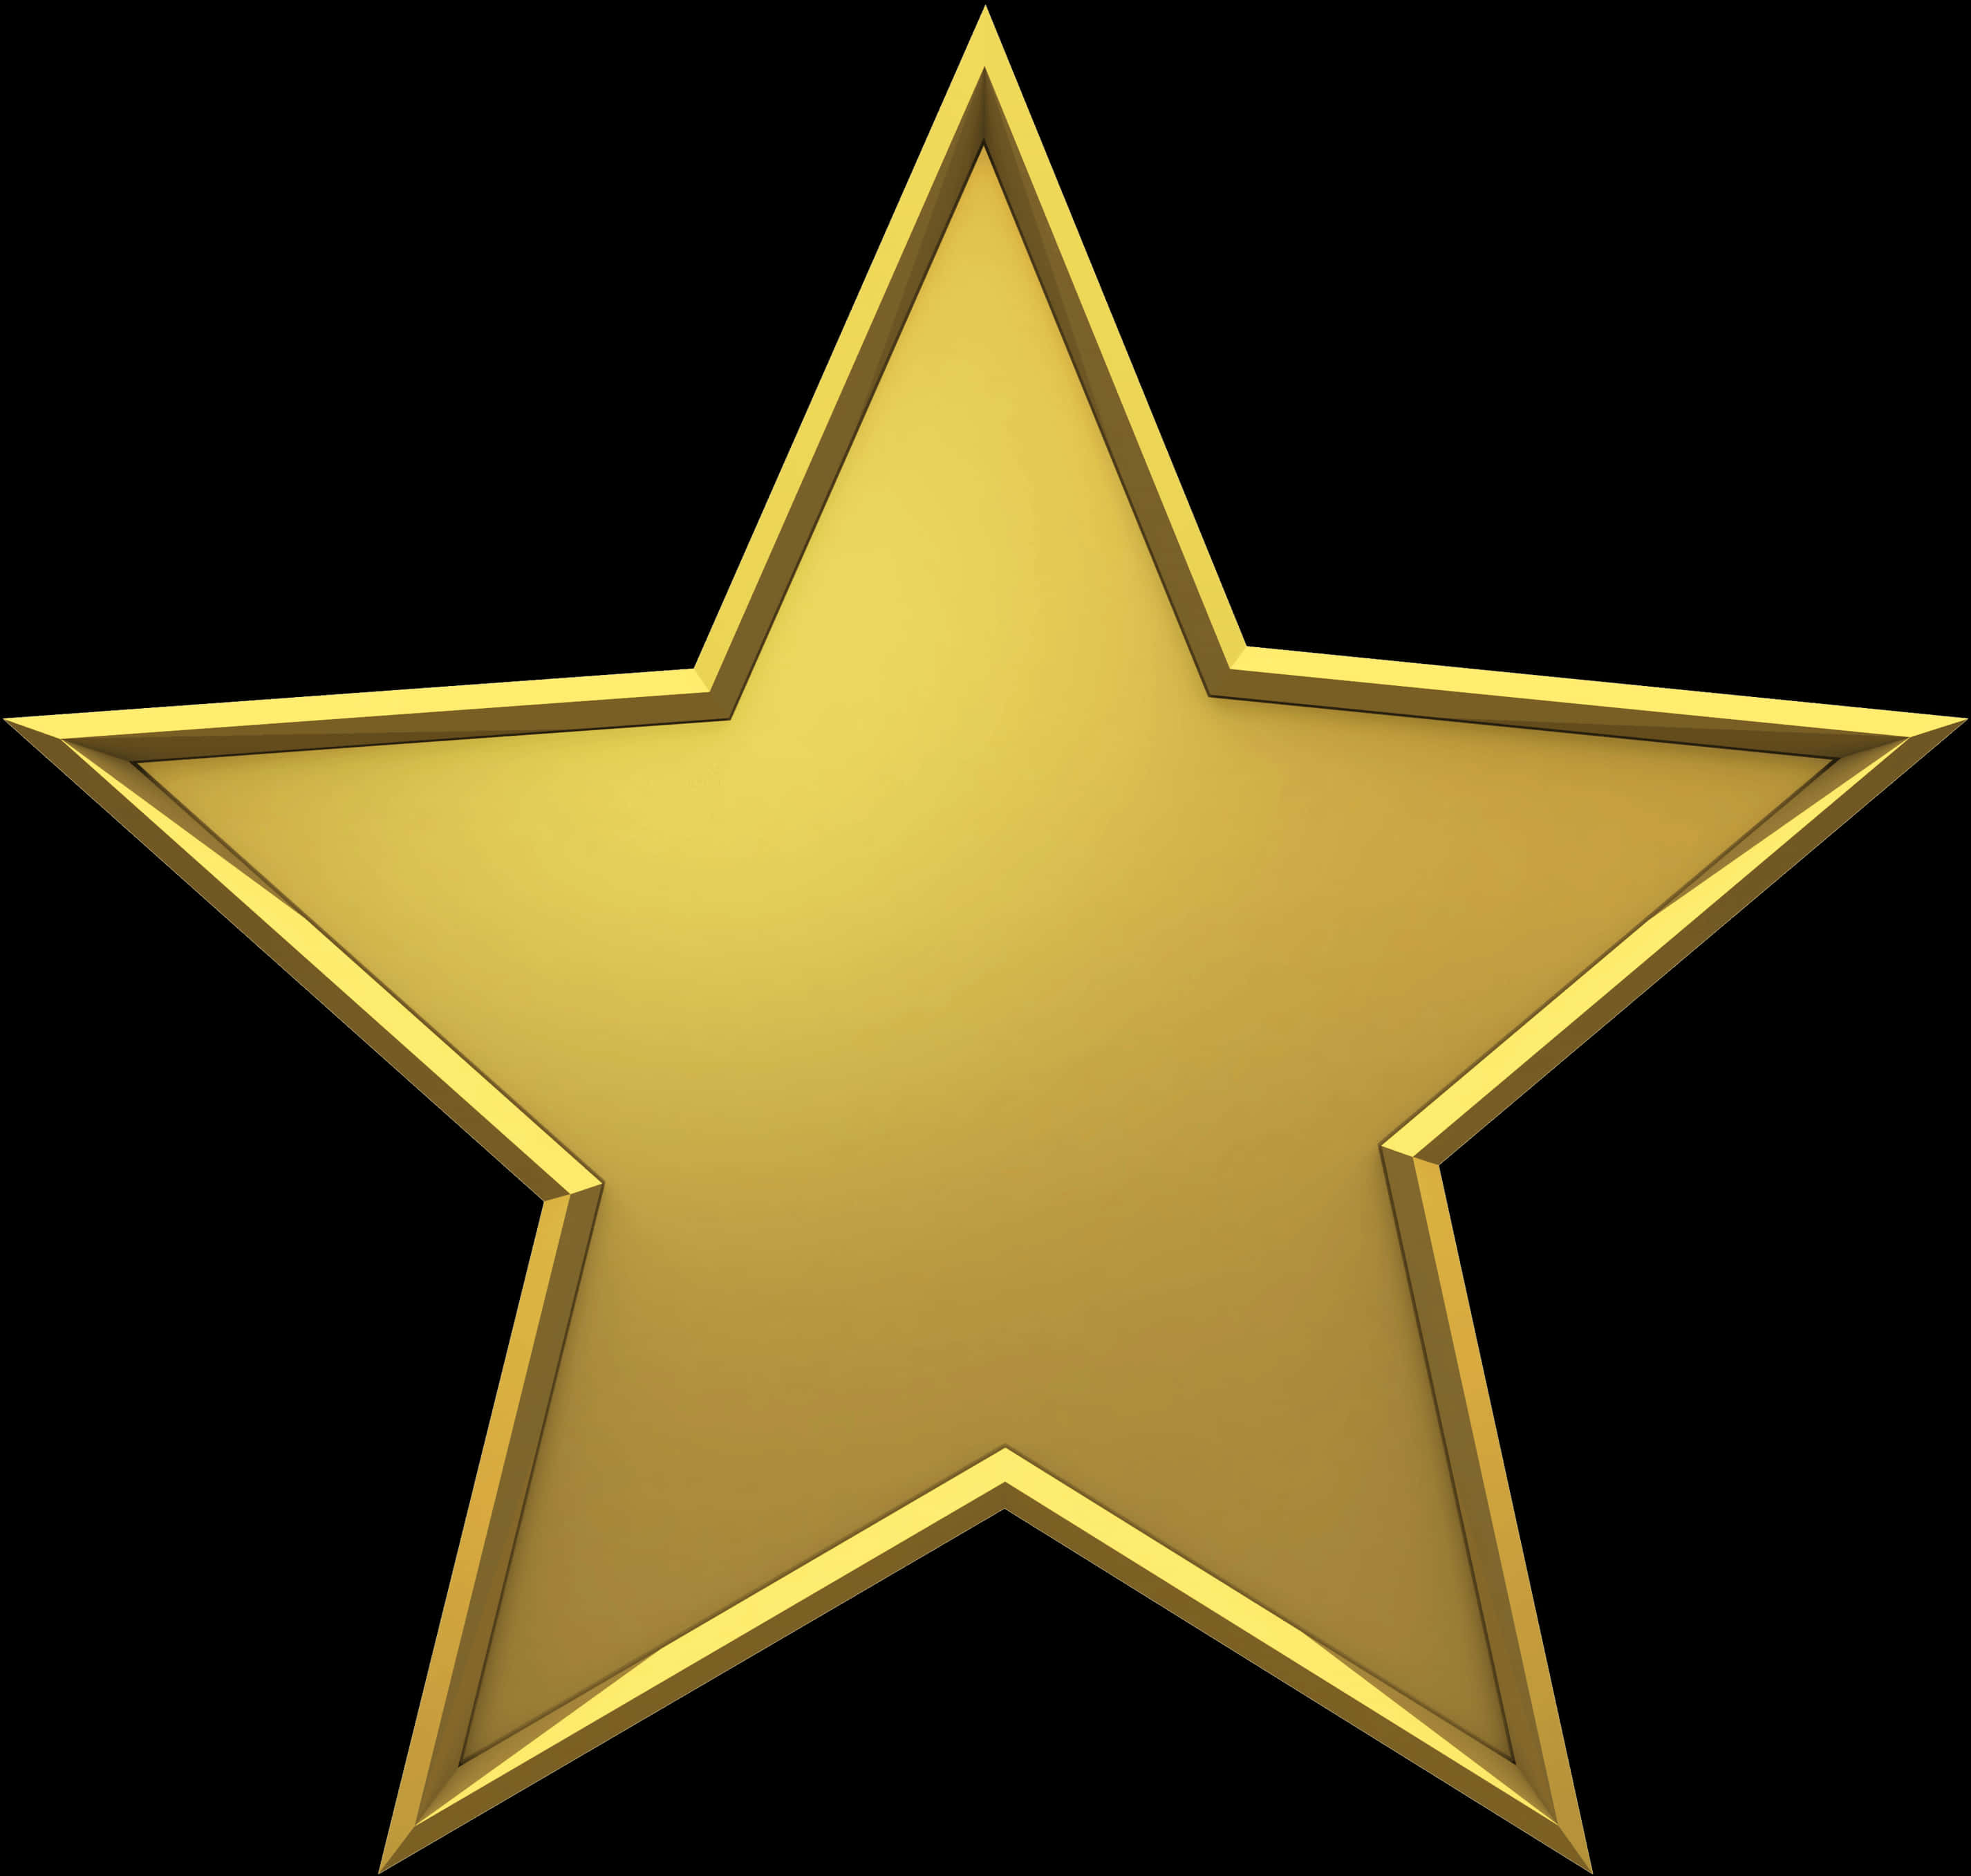 Golden Star Glittering Graphic PNG image